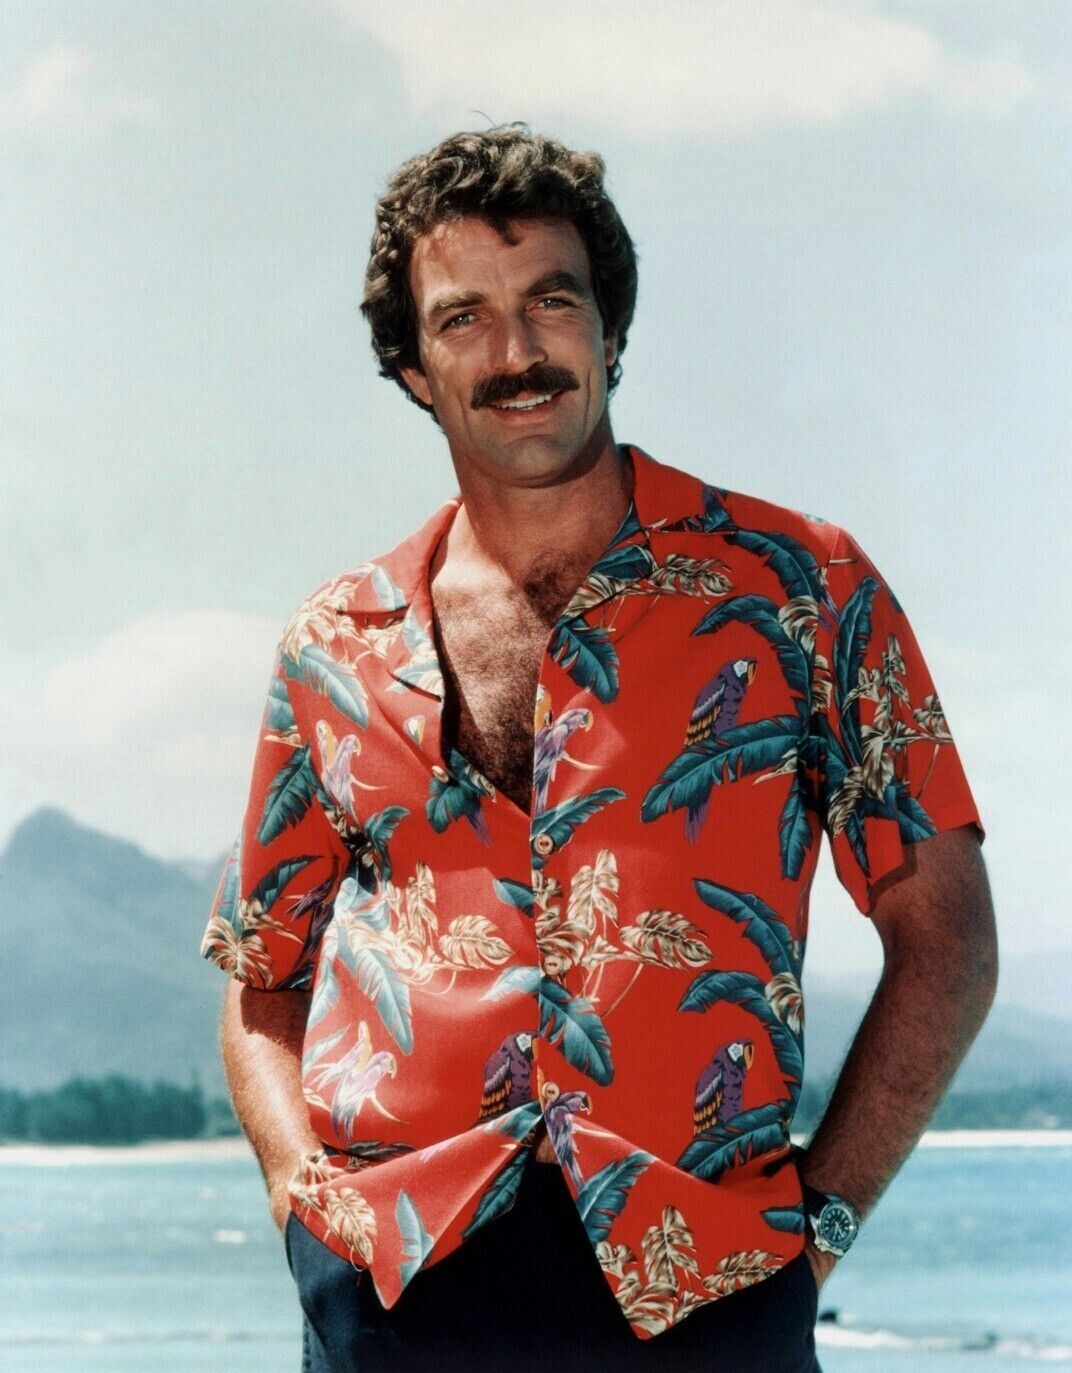 Actor Tom Selleck in TV Show Magnum P.I. Publicity Picture Poster Photo 4x6